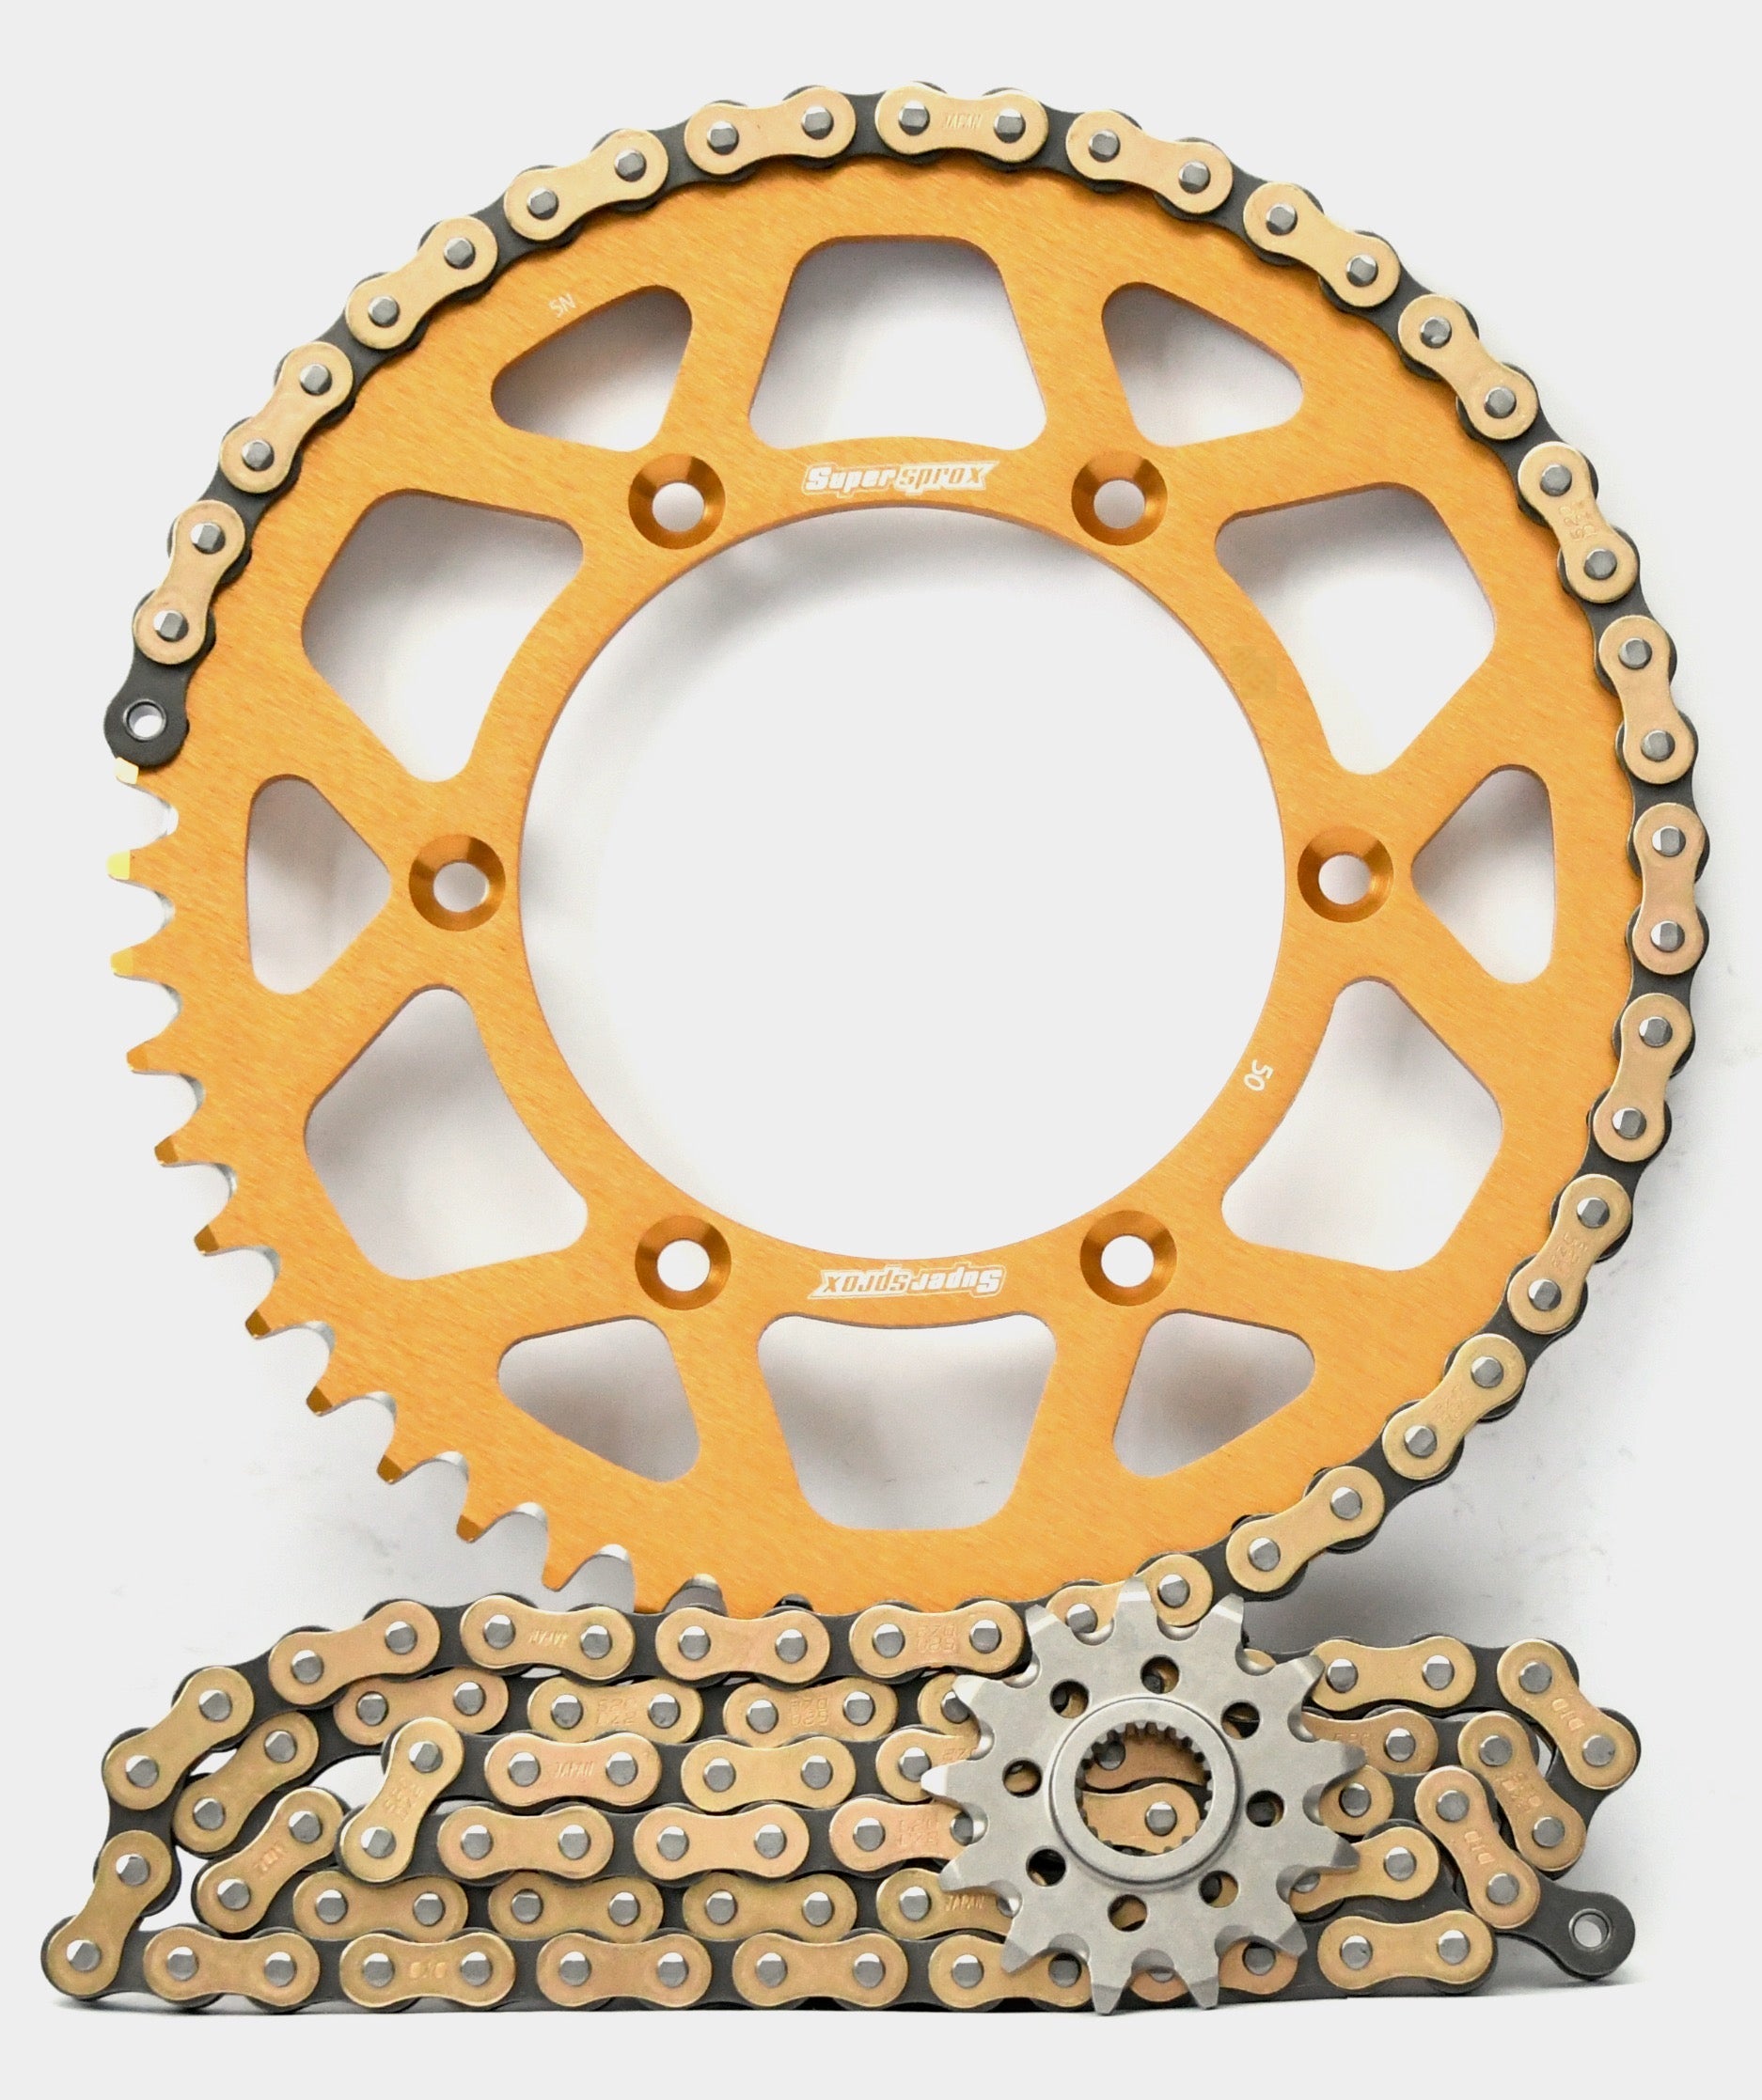 Supersprox Chain & Aluminium Sprocket Kit for Honda CRF250R 2004-2017 - Choose Your Gearing